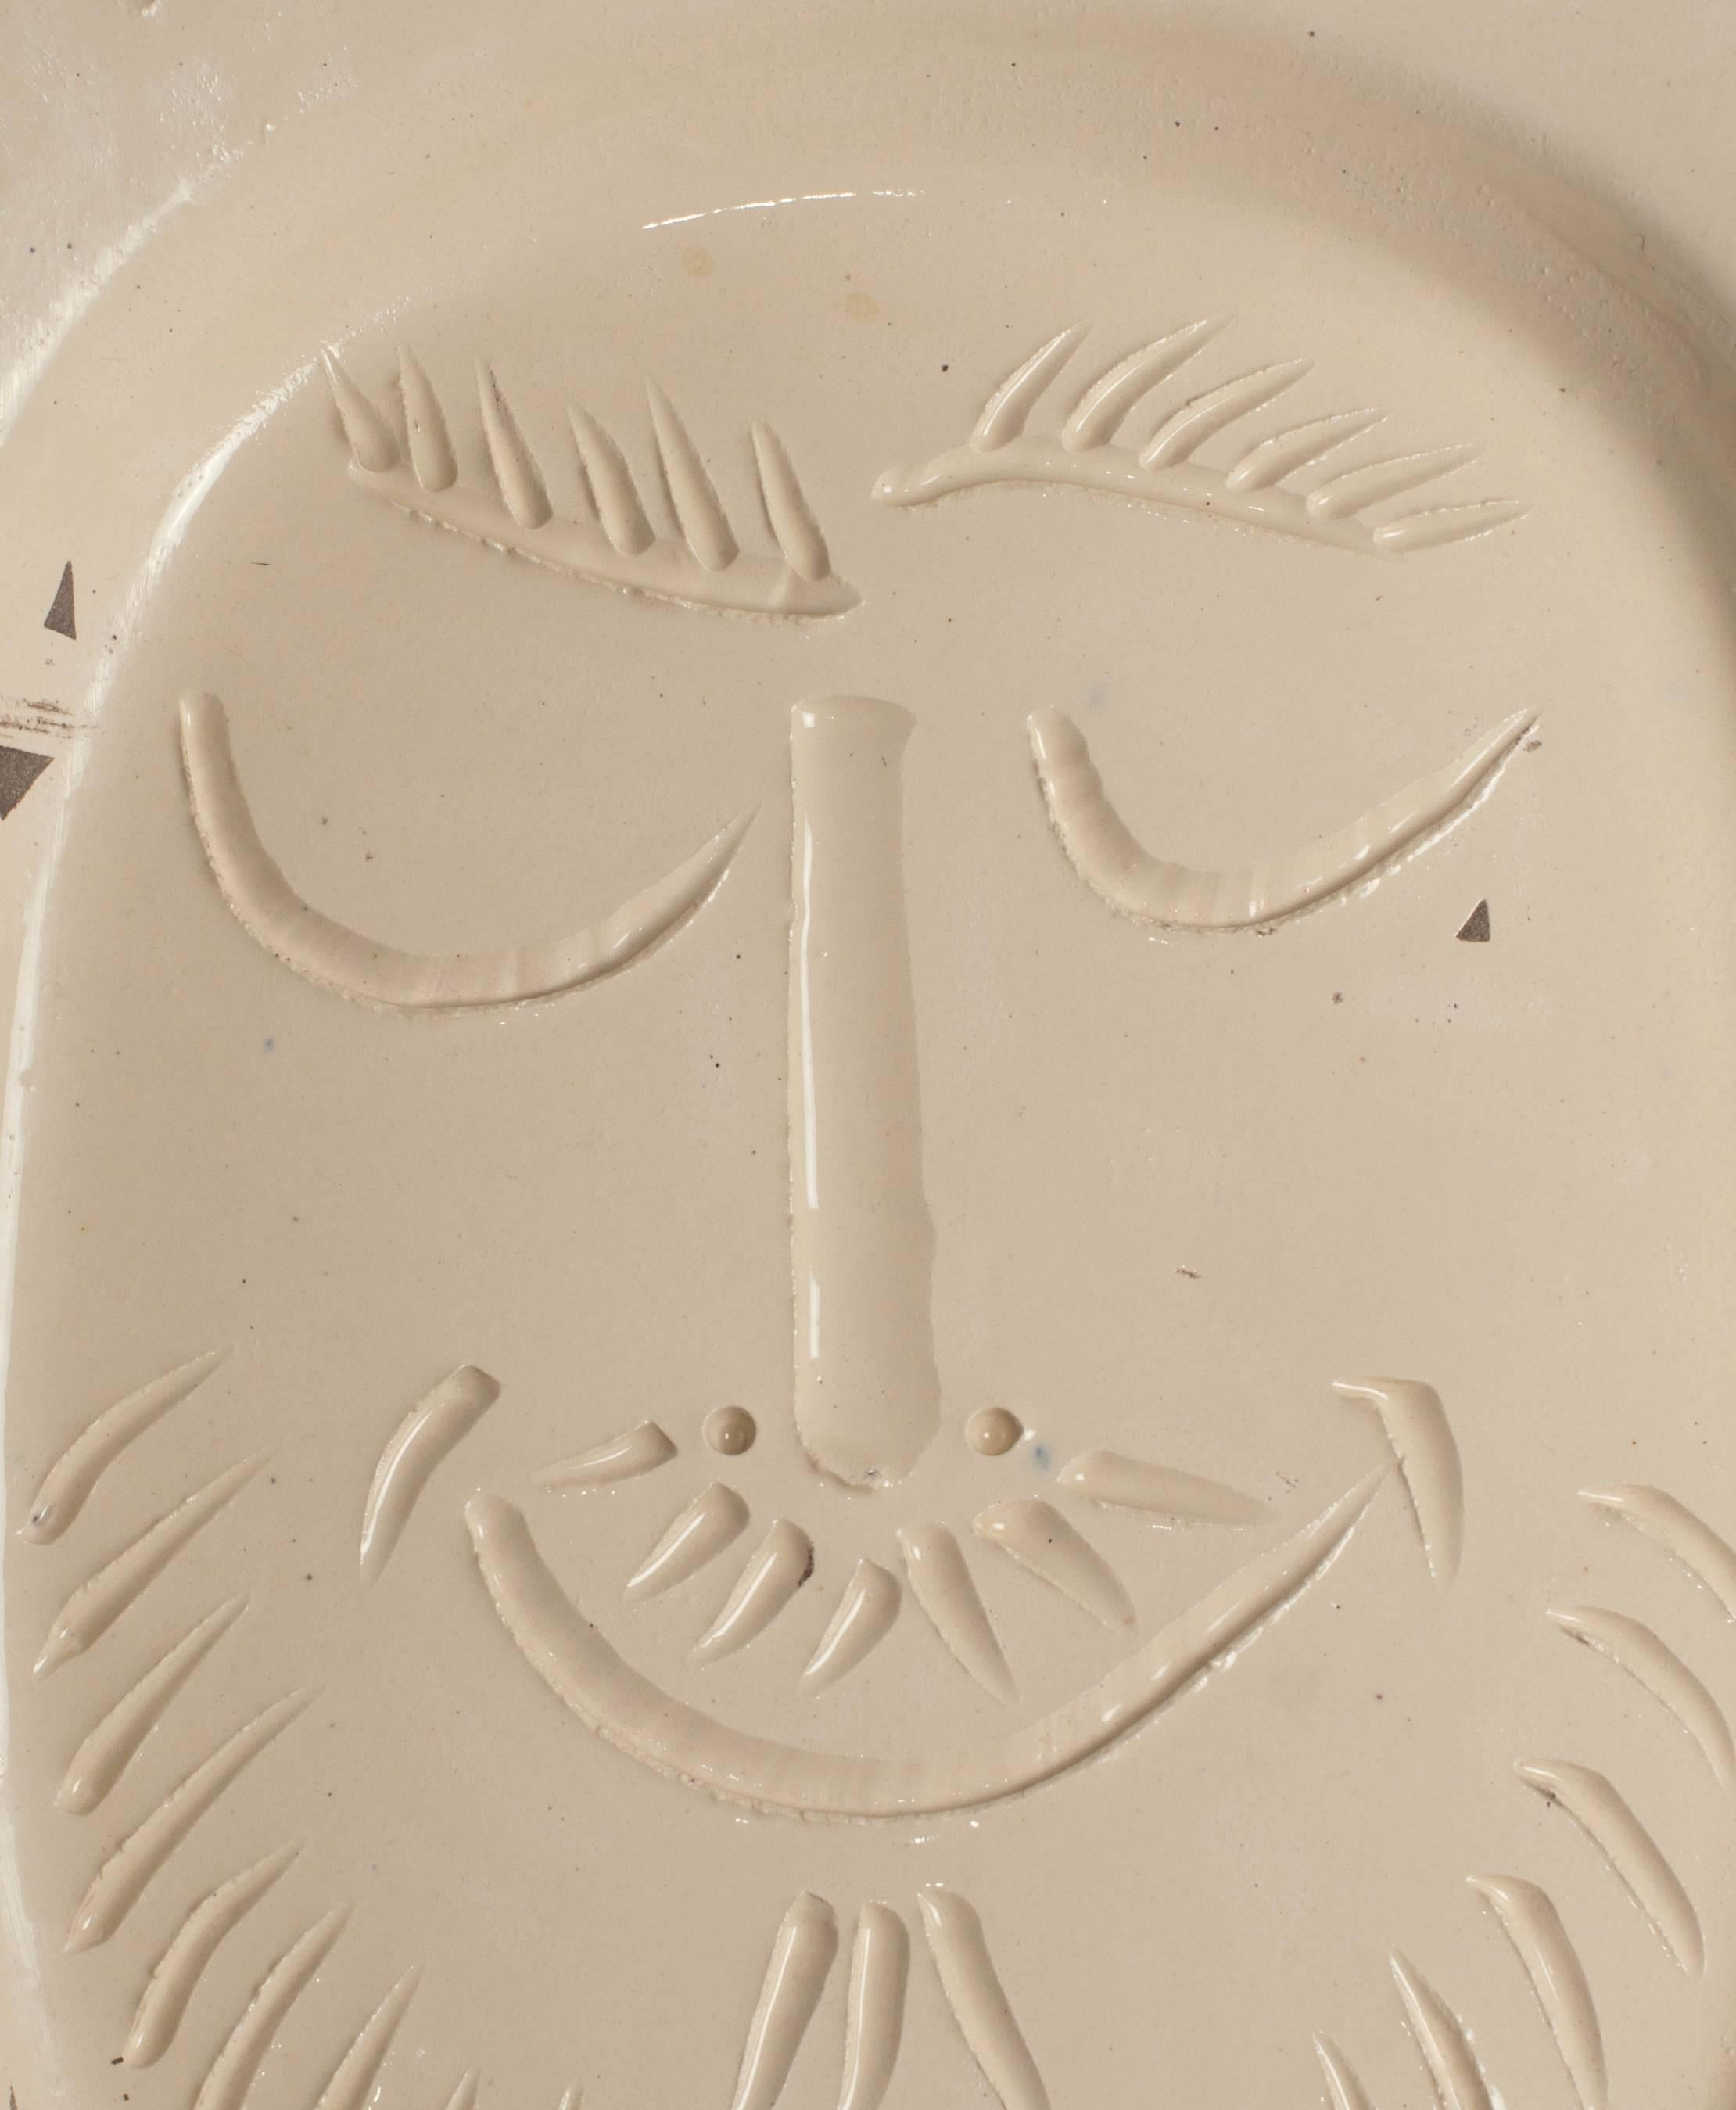 Original Picasso white dish showing a happy man’s face. Made white earthenware clay, knife engraved decoration under brushed glaze, grey patina. To a certain extent it is like minimal or zero-art, in a deep warm creamy color. Edition Picasso nr 114